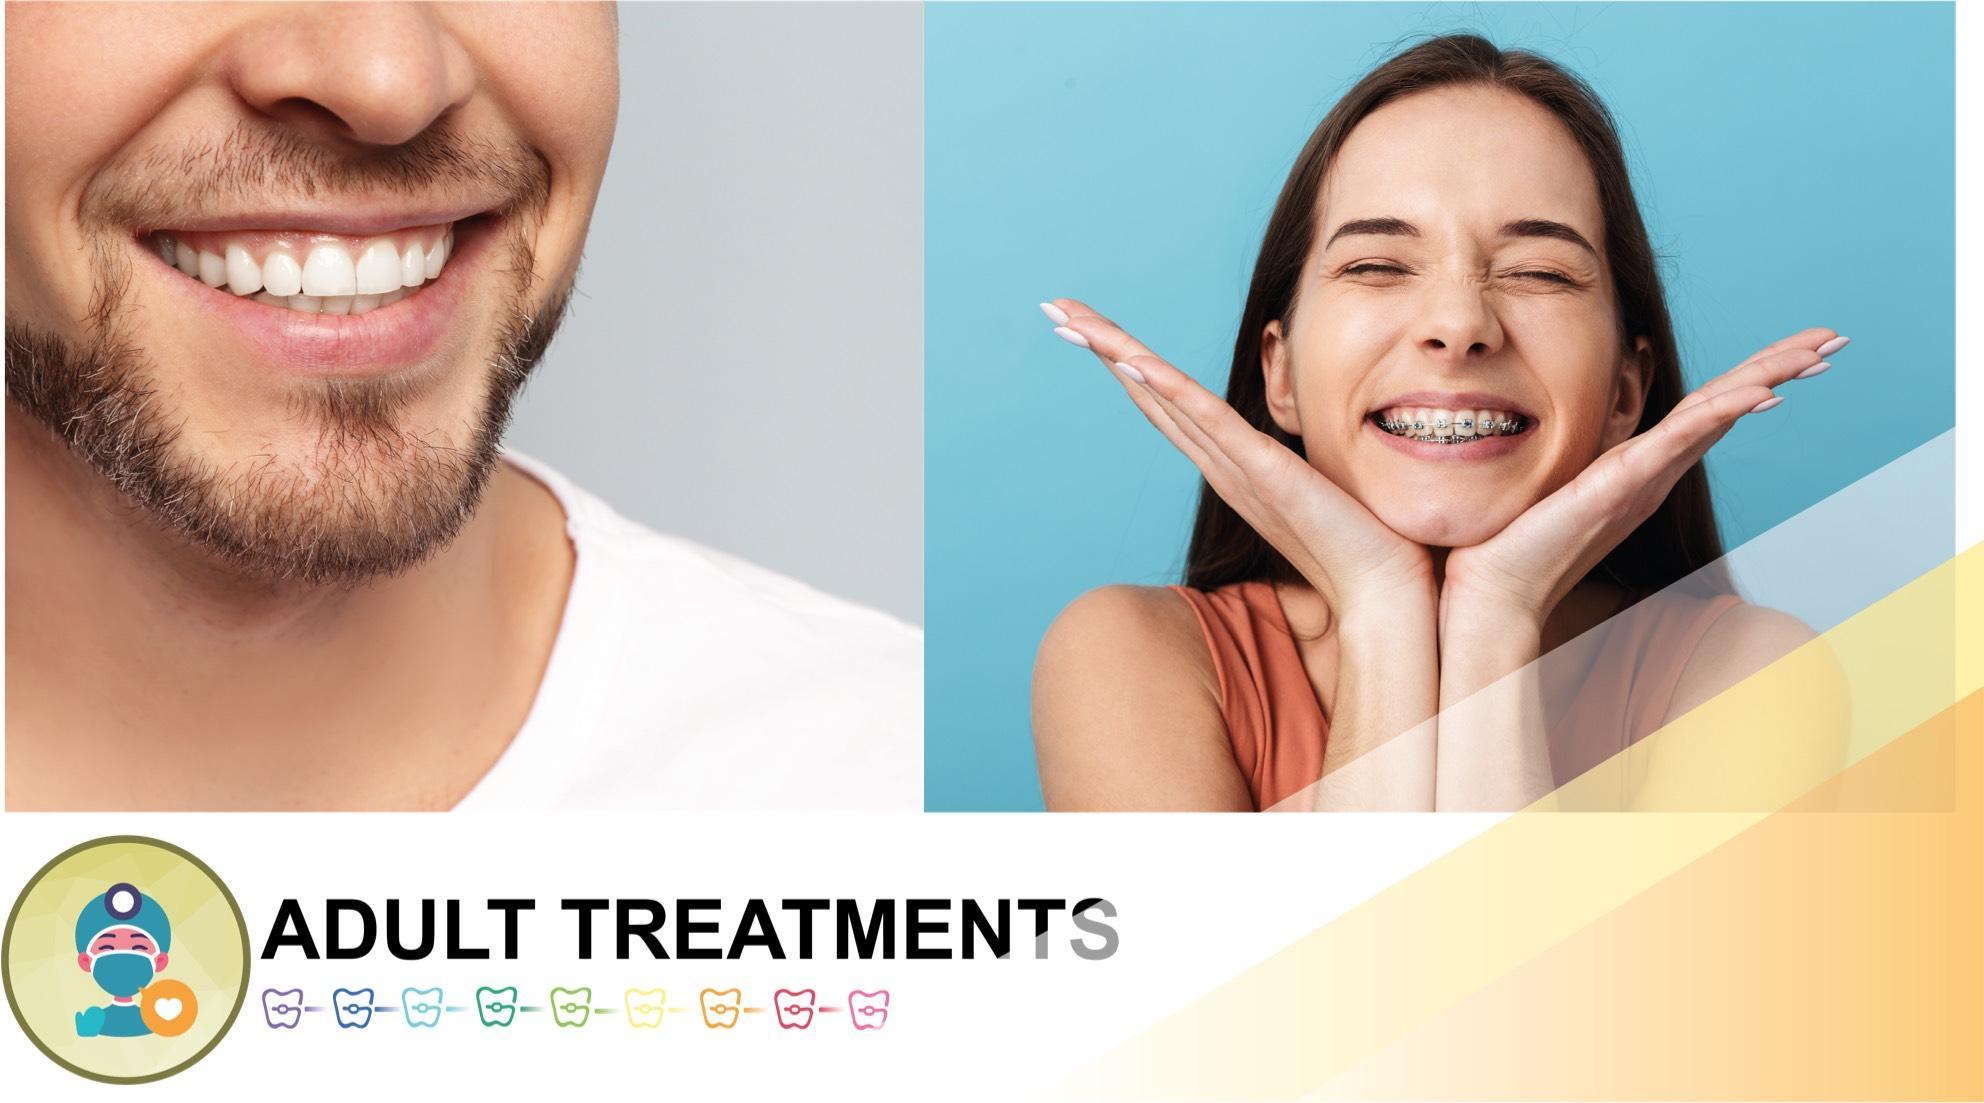 OrthoBoutique - male and female smiling after adult treatments